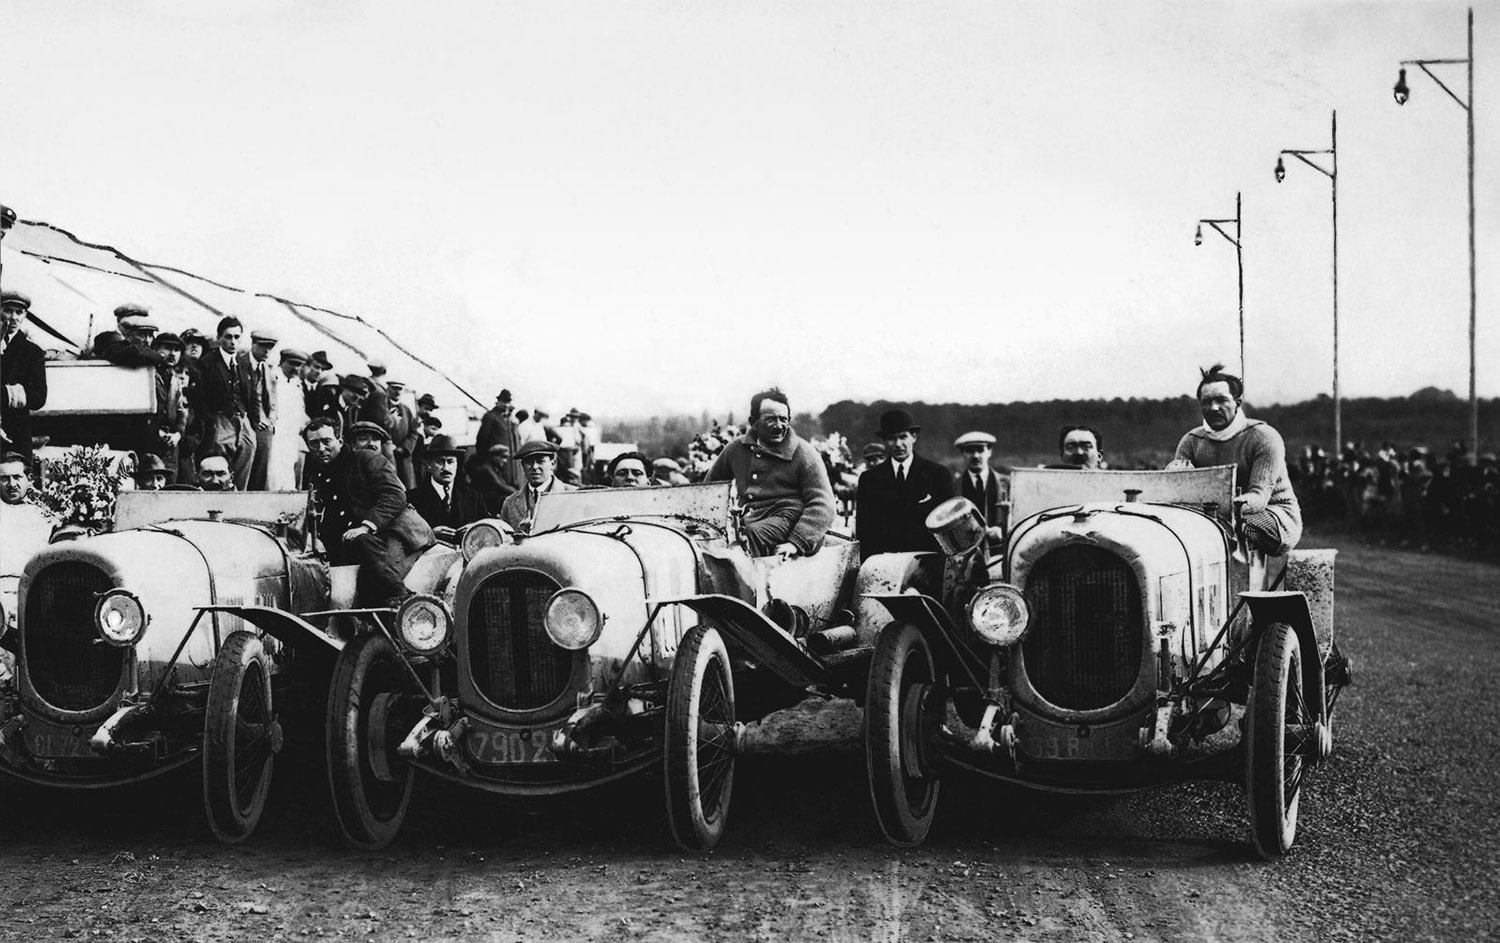 1920s car racers with Michelin tires